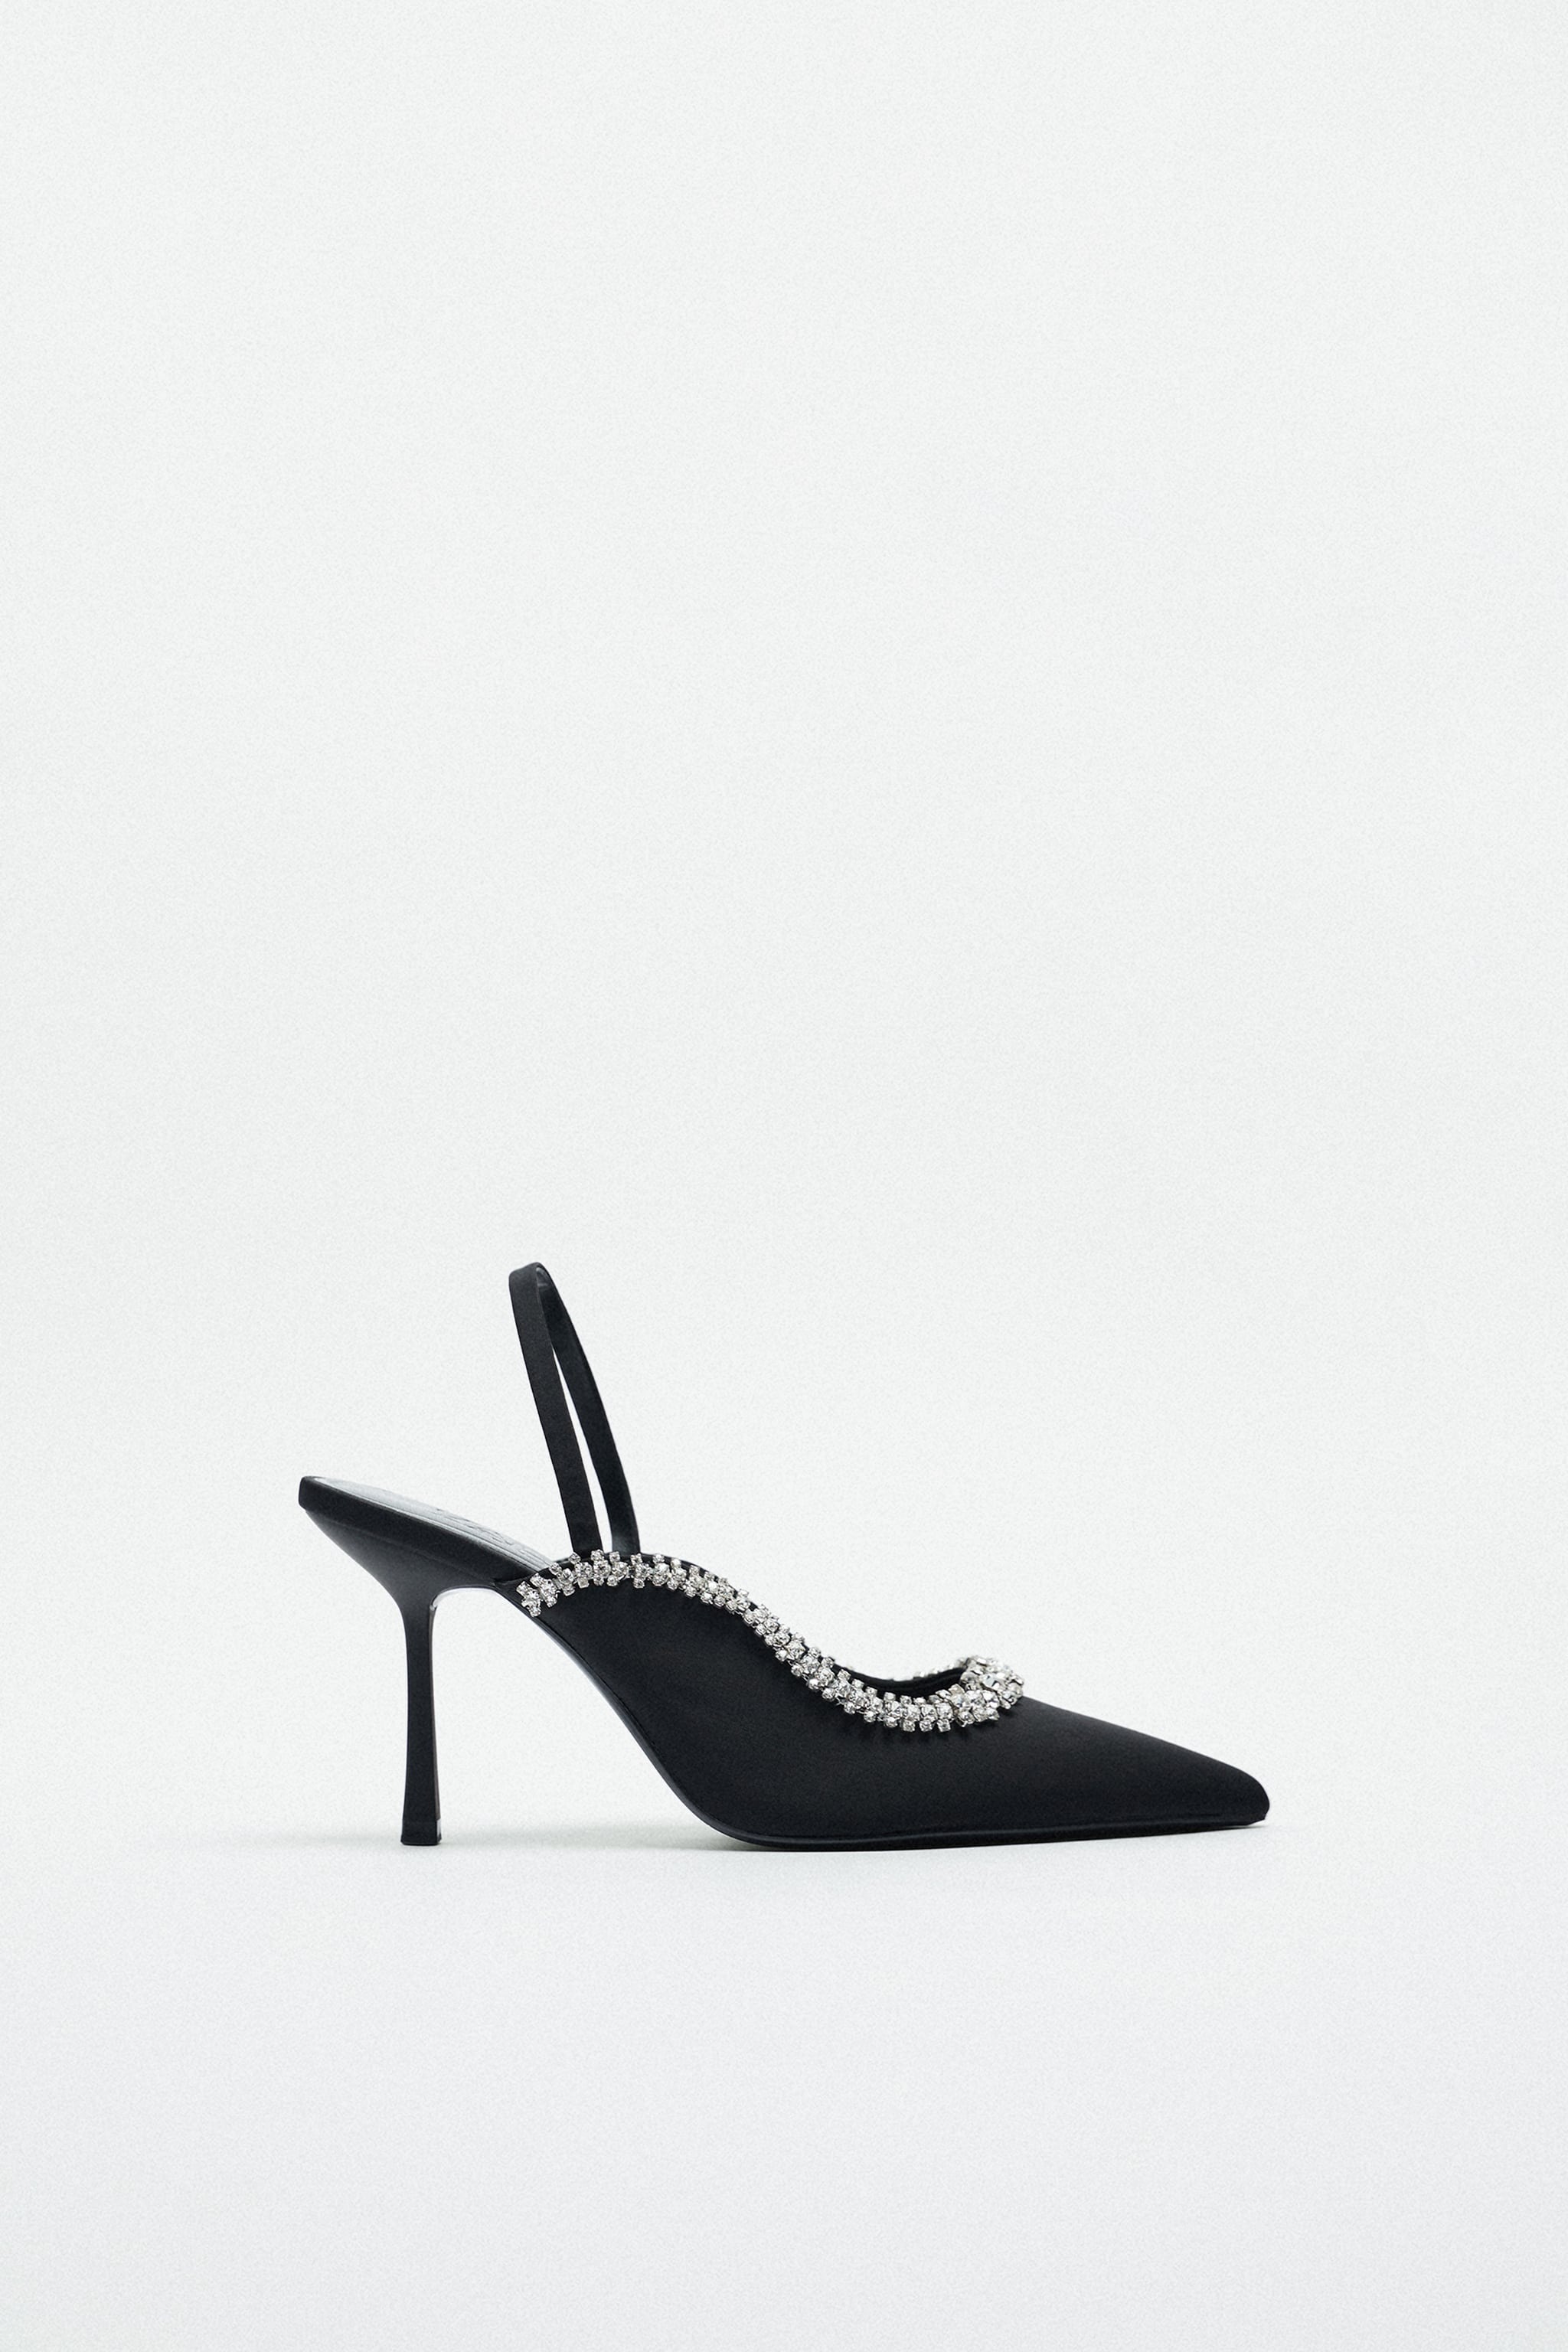 30 Going-Out Shoes From Zara That Are So Pretty | Who What Wear